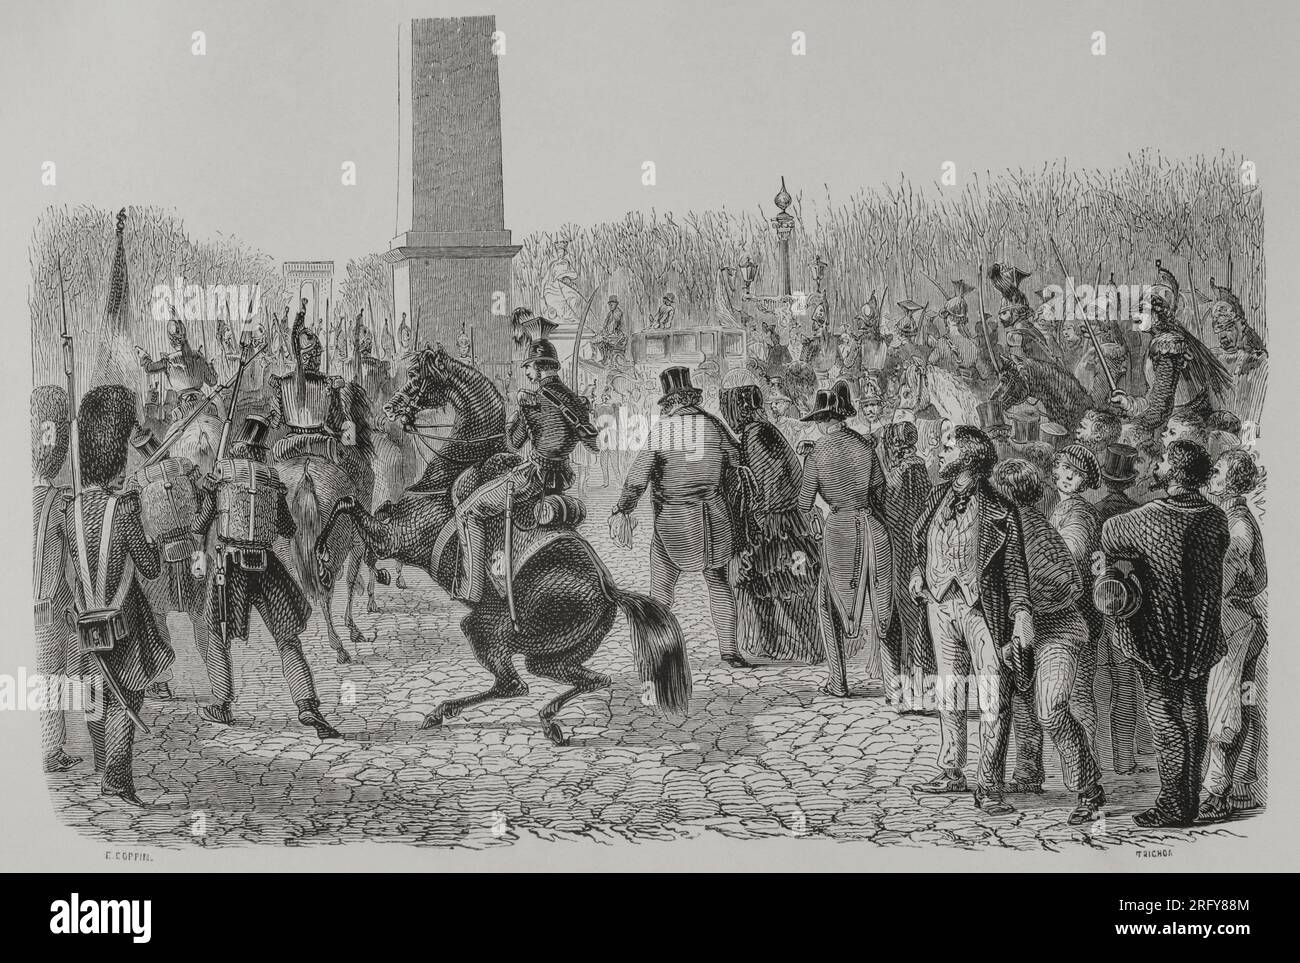 French Revolution of 1848. The Parisians took up arms on 23 and 24 February 1848, leading to the abdication of King Louis-Philippe I (1773-1850). The crowd storming the Tuileries on 24 February 1848, the king's refusal to grant universal suffrage. Louis-Philippe I and his family fleeing Paris. Engraving by E. Coppin and Trichon. 'Los Héroes y las Grandezas de la Tierra'. Volume V, 1855. Stock Photo